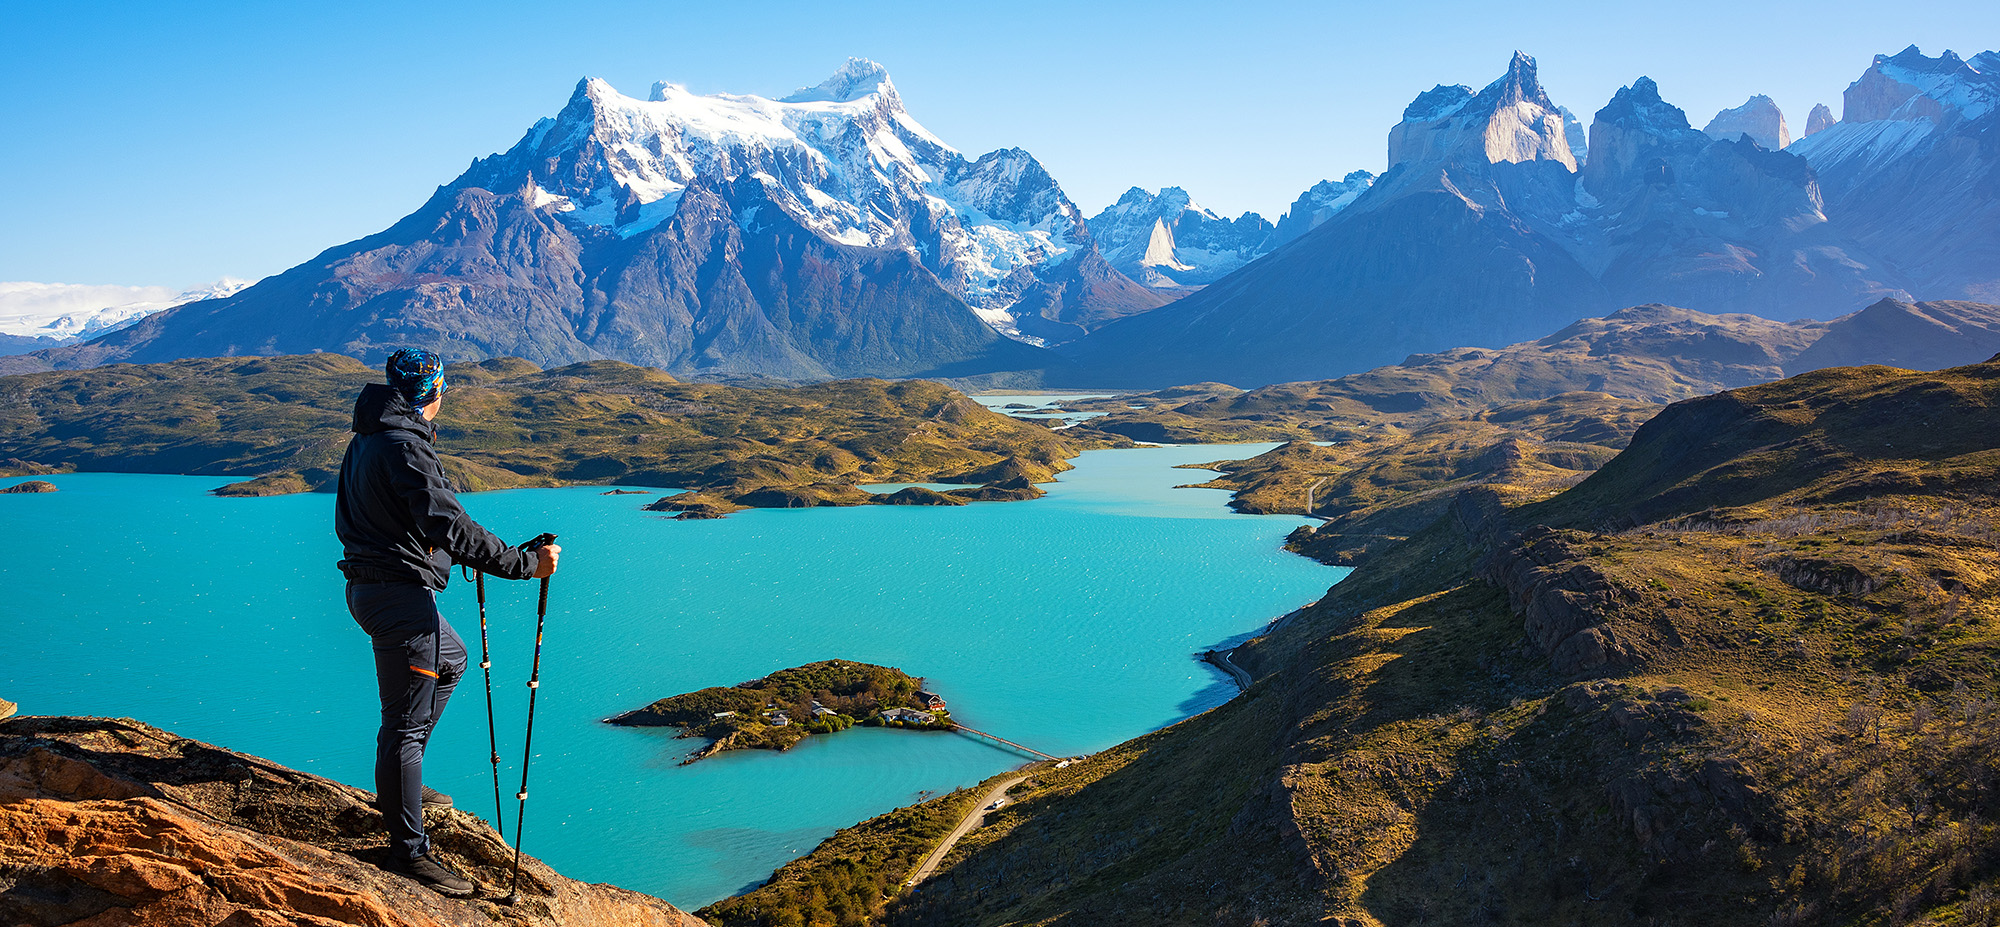 Marvel at the Natural Wonders of Chile 